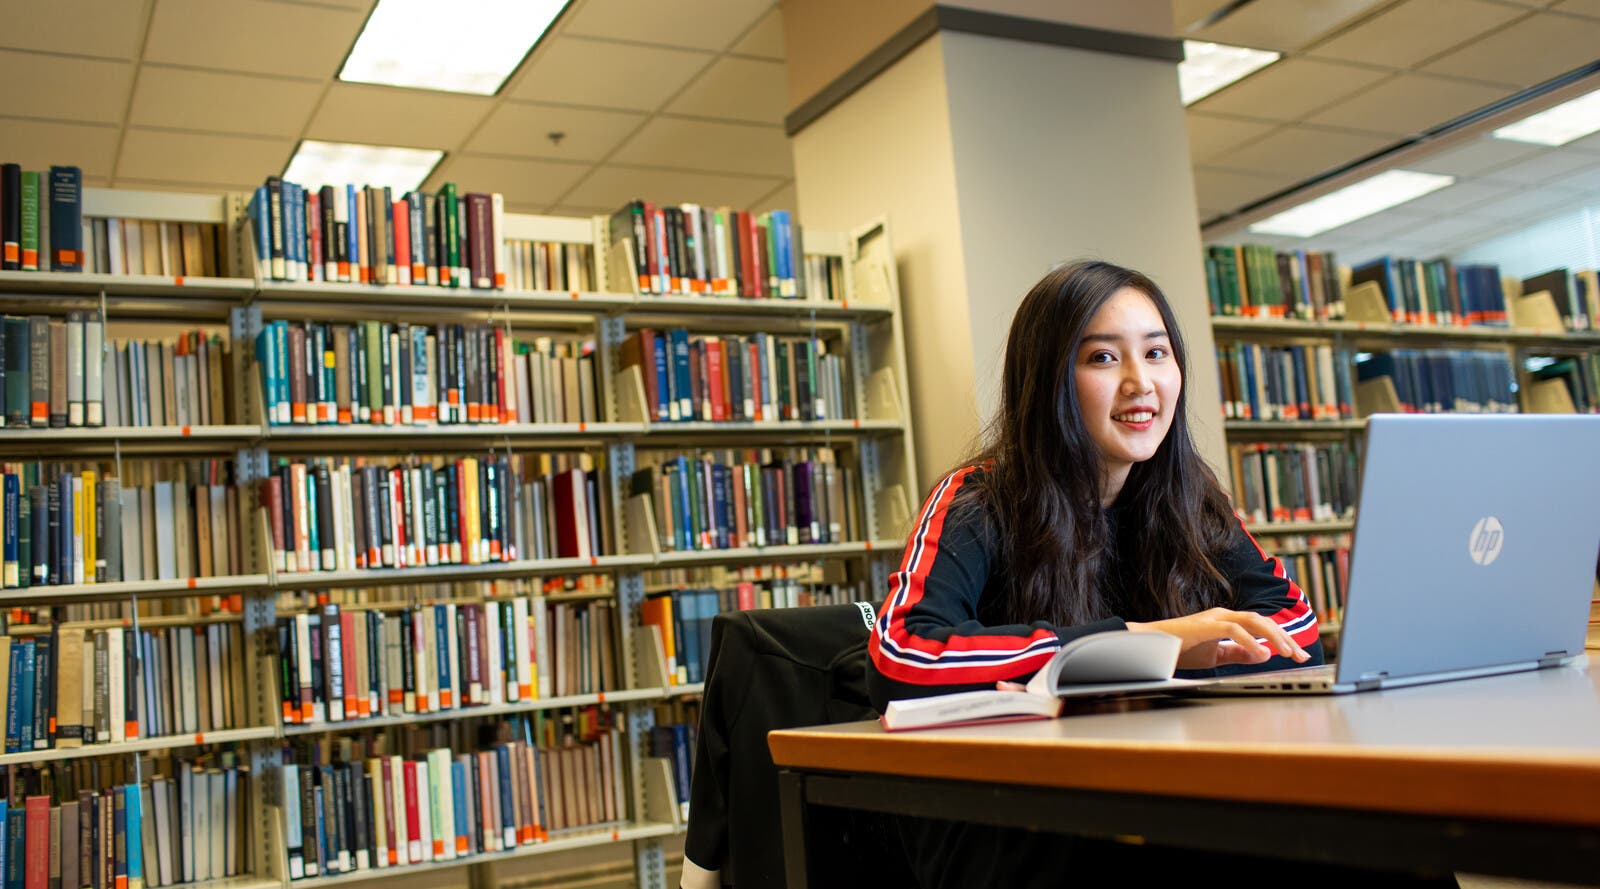 Student smiling and using laptop in library